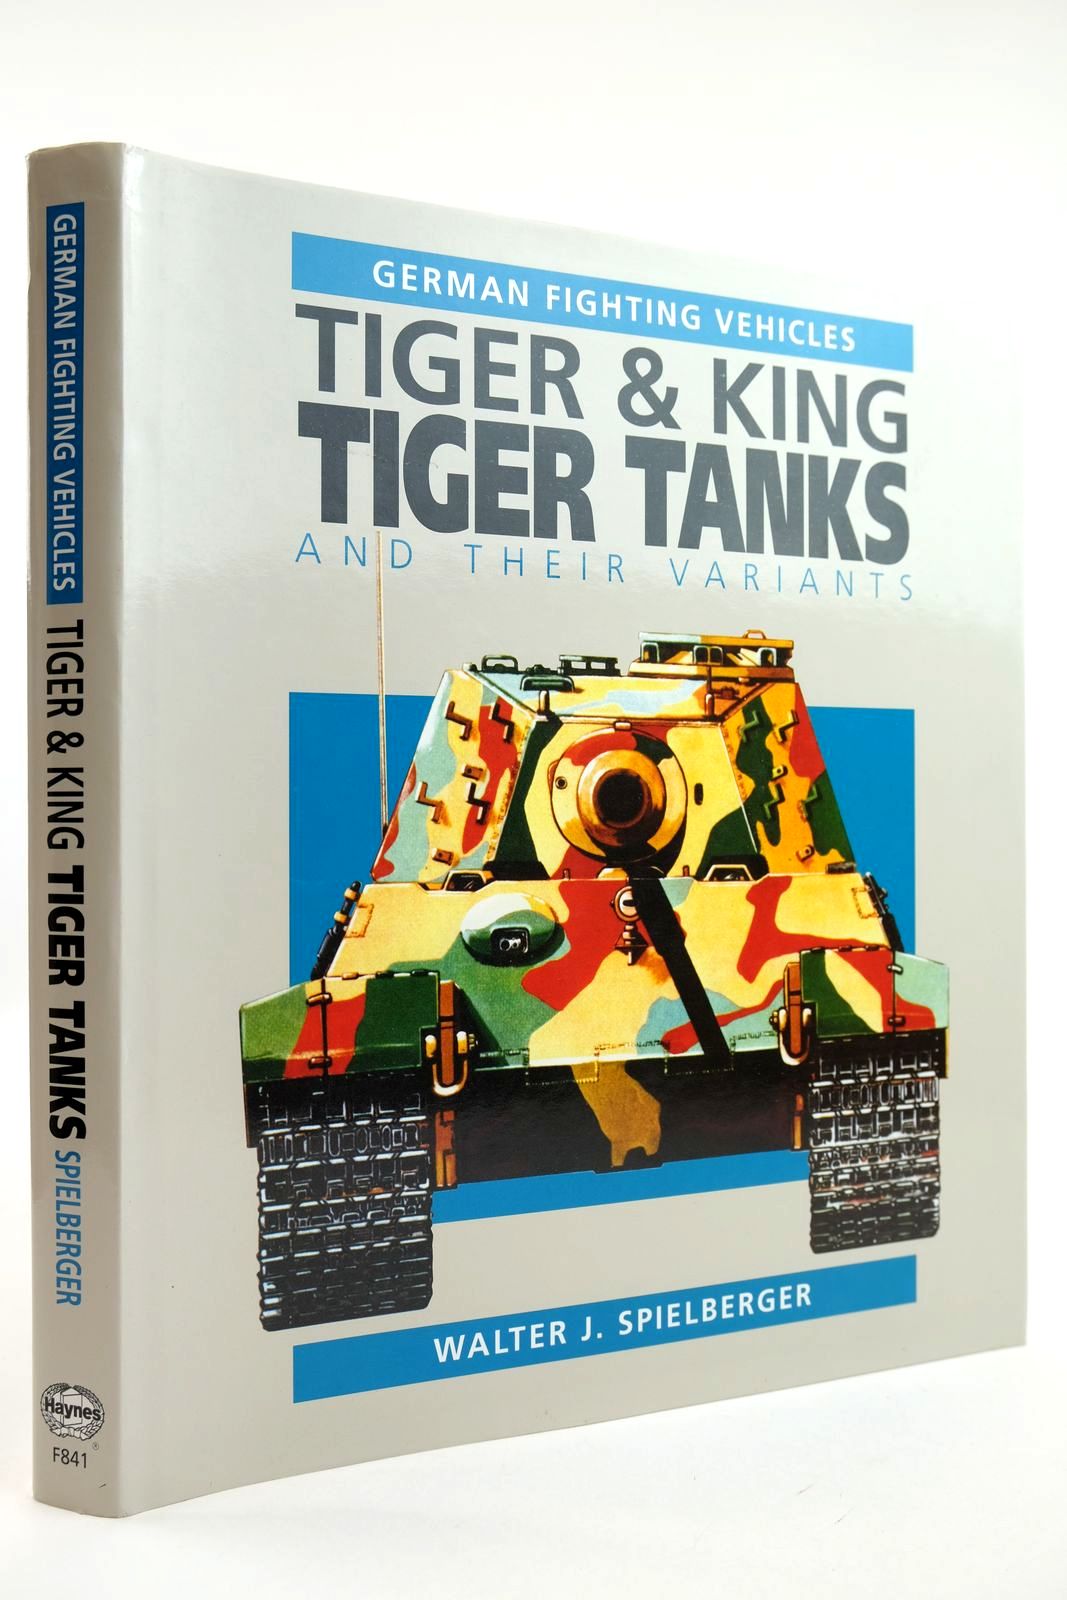 Photo of GERMAN FIGHTING VEHICLES TIGER &amp; KING TIGER TANKS AND THEIR VARIANTS written by Spielberger, Walter J. published by Foulis, Haynes (STOCK CODE: 2132095)  for sale by Stella & Rose's Books